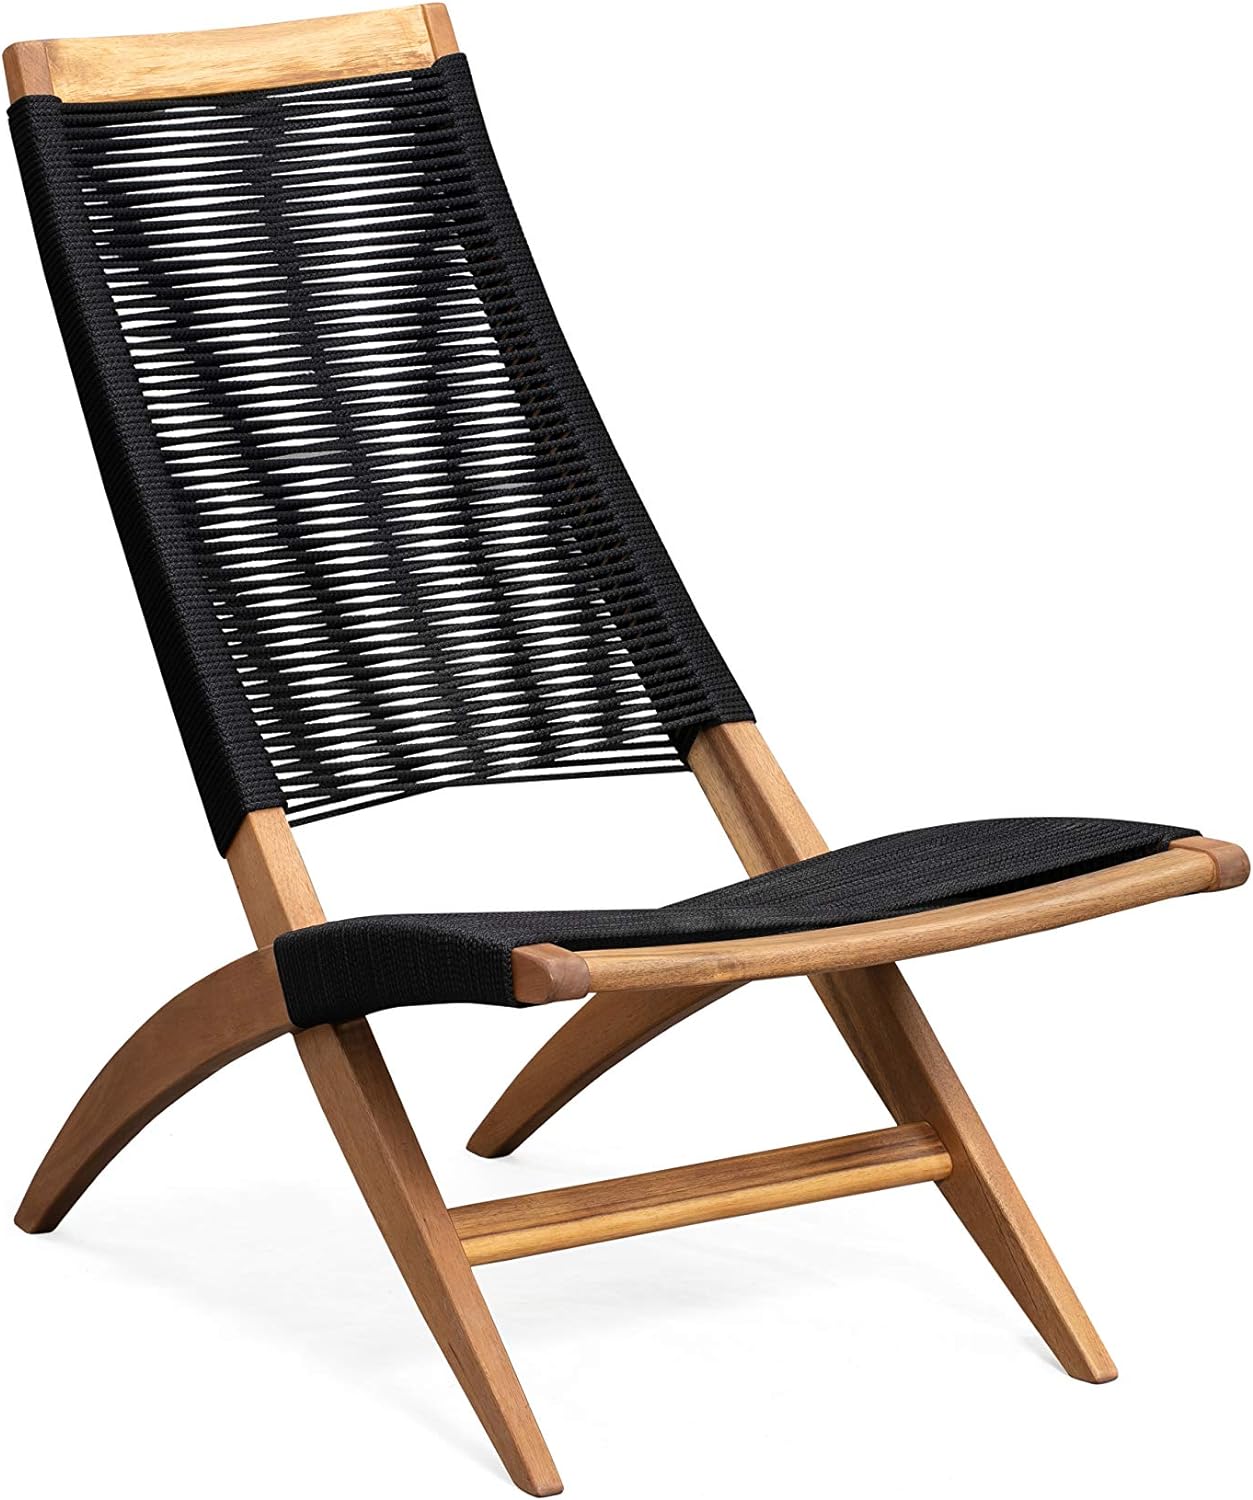 Patio Sense 63364 Lisa Modern Lounge Chair Natural Wood Finish Mid Century Modern Wooden Chair Living Room Bedroom Patio Porch Lawn Poolside Backyard Indoors & Outdoors - Acacia Wood